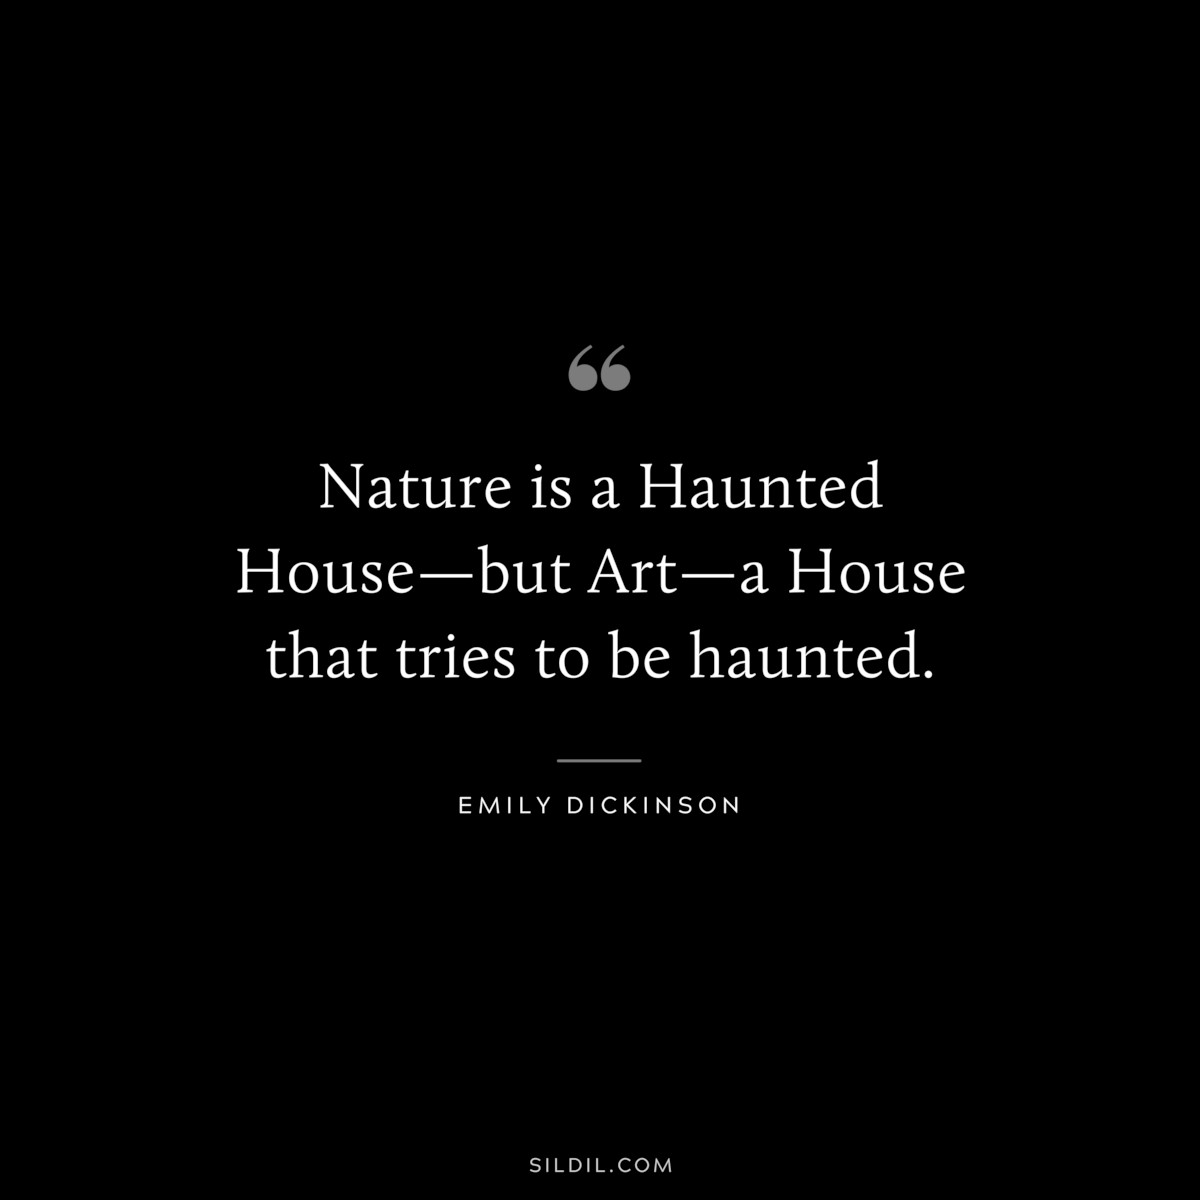 Nature is a Haunted House—but Art—a House that tries to be haunted.